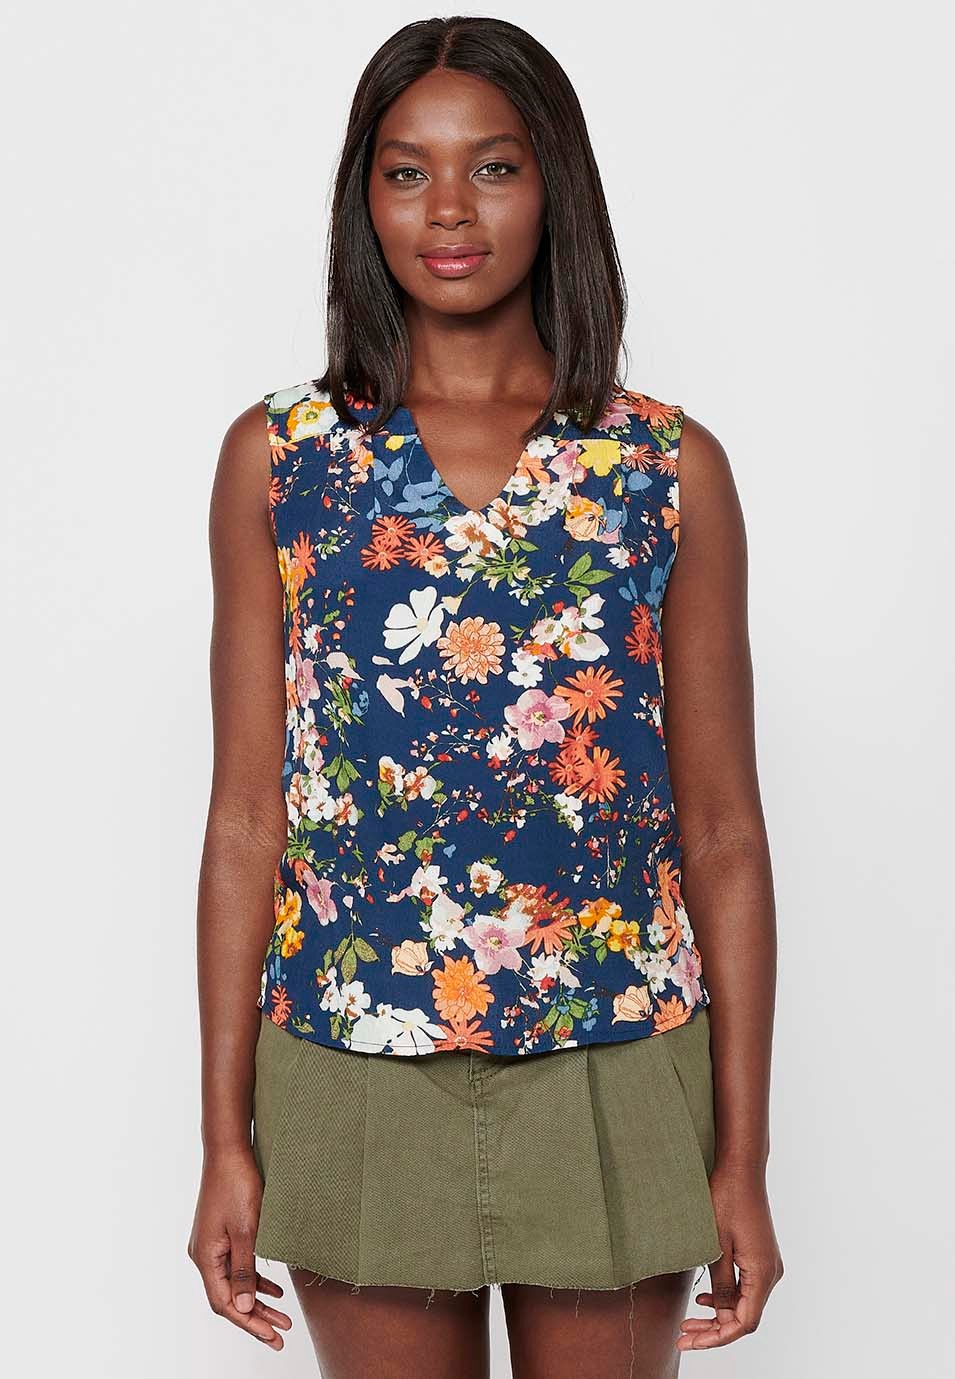 Women's Multicolor Floral Print Button Front Closure Shirt Style Sleeveless Blouse